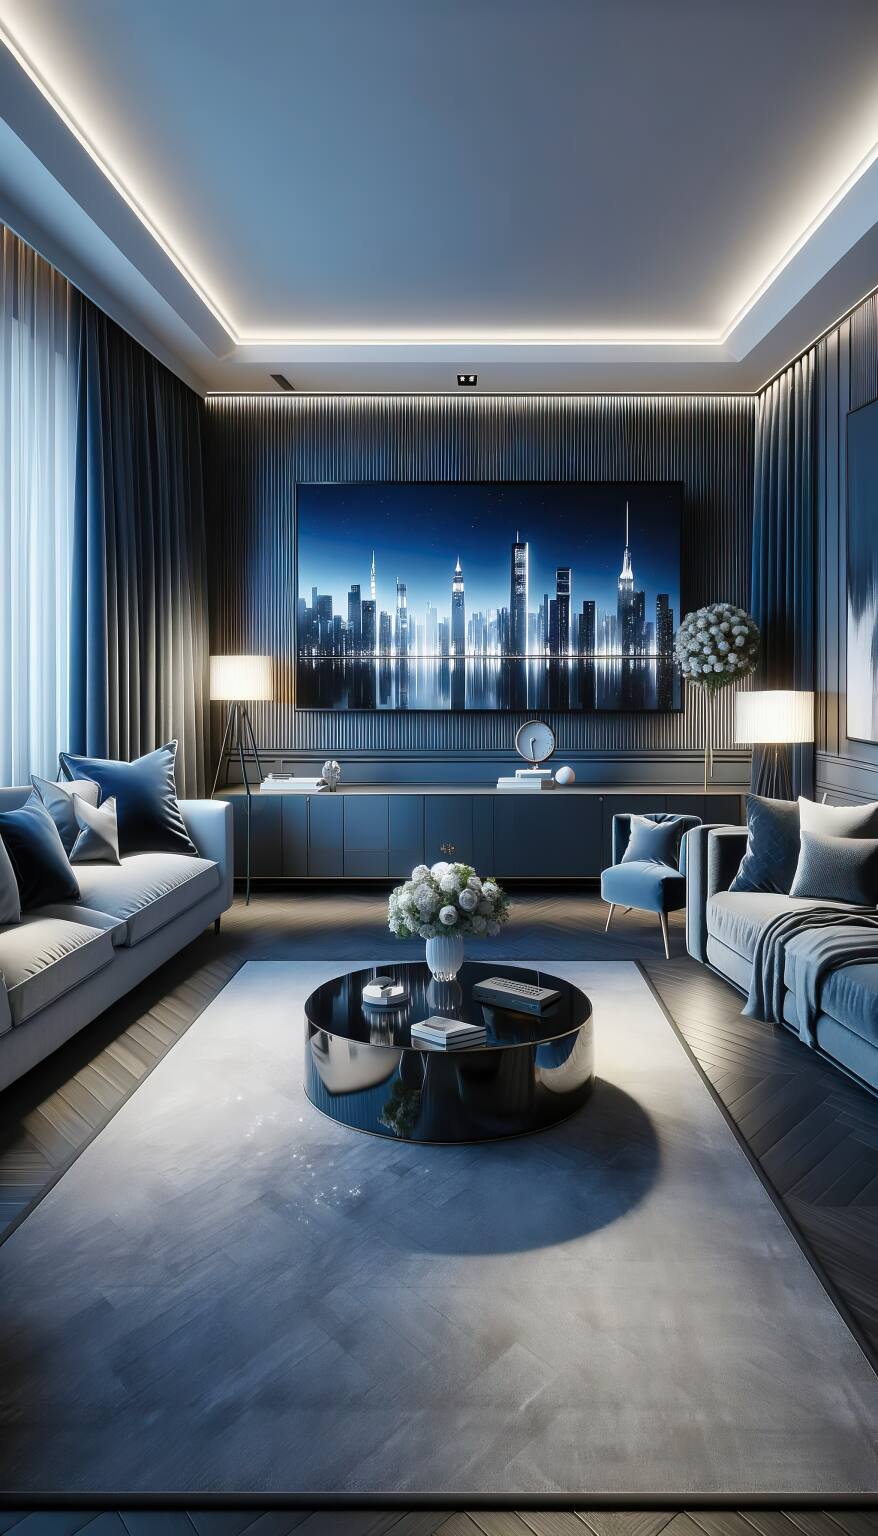 A Modern Romantic Living Room In Navy And Silver, Featuring A Sleek Sofa And A State-Of-The-Art Flat-Screen Tv, Set In A Serene, Sophisticated Metropolitan Ambiance.